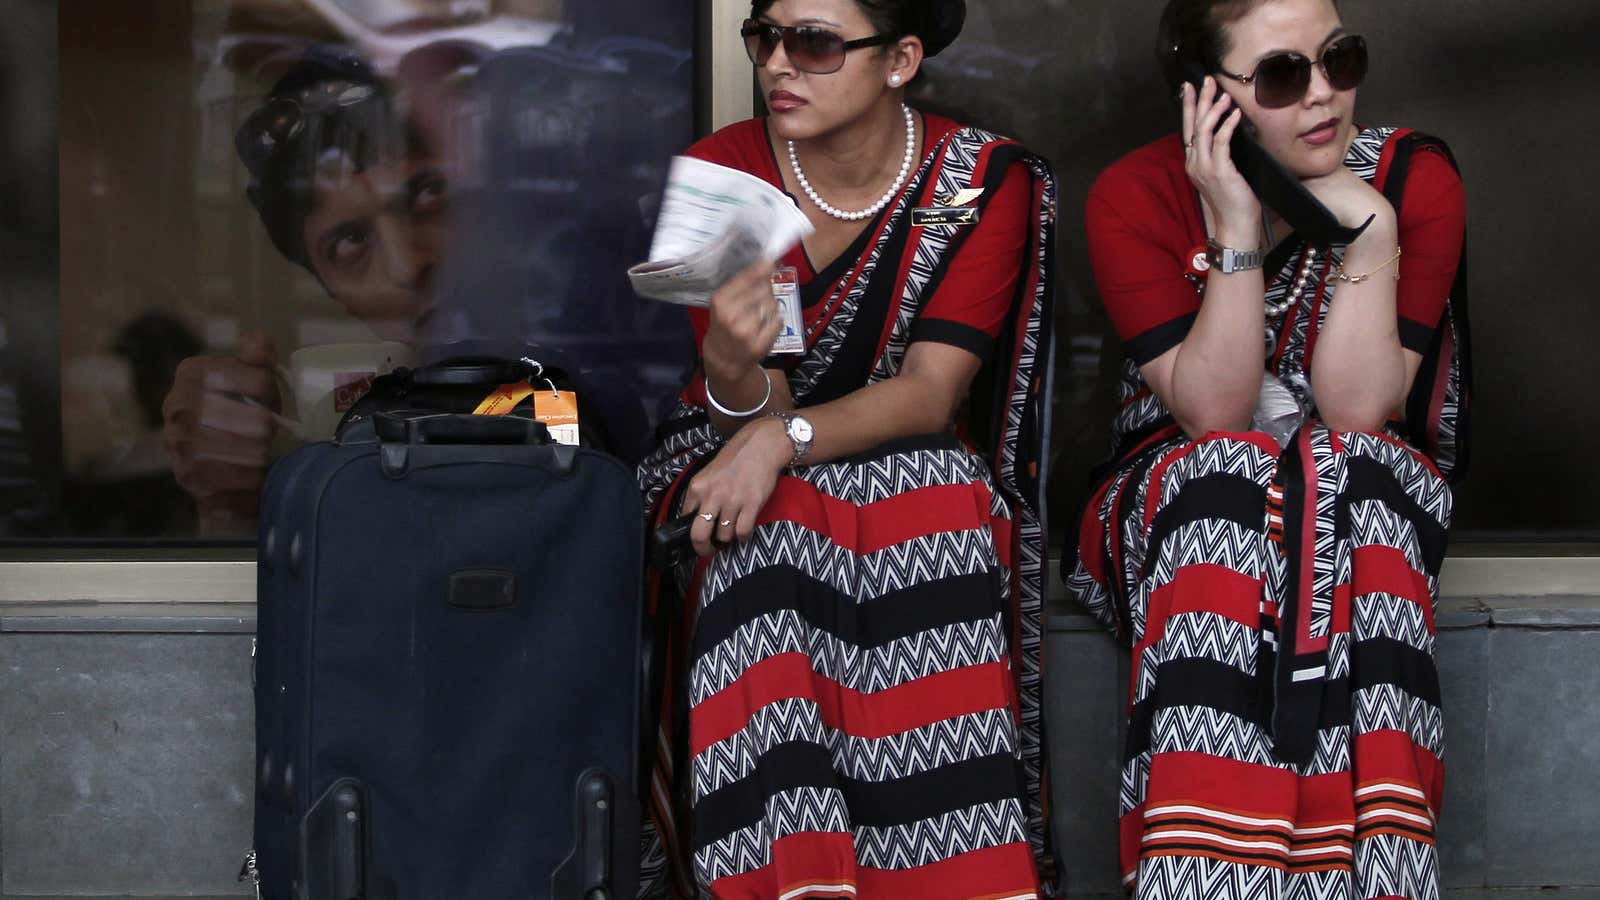 Air India air hostesses sit outside the domestic airport as part of a strike in New Delhi May 25, 2010. About 25,000 Air India employees,…